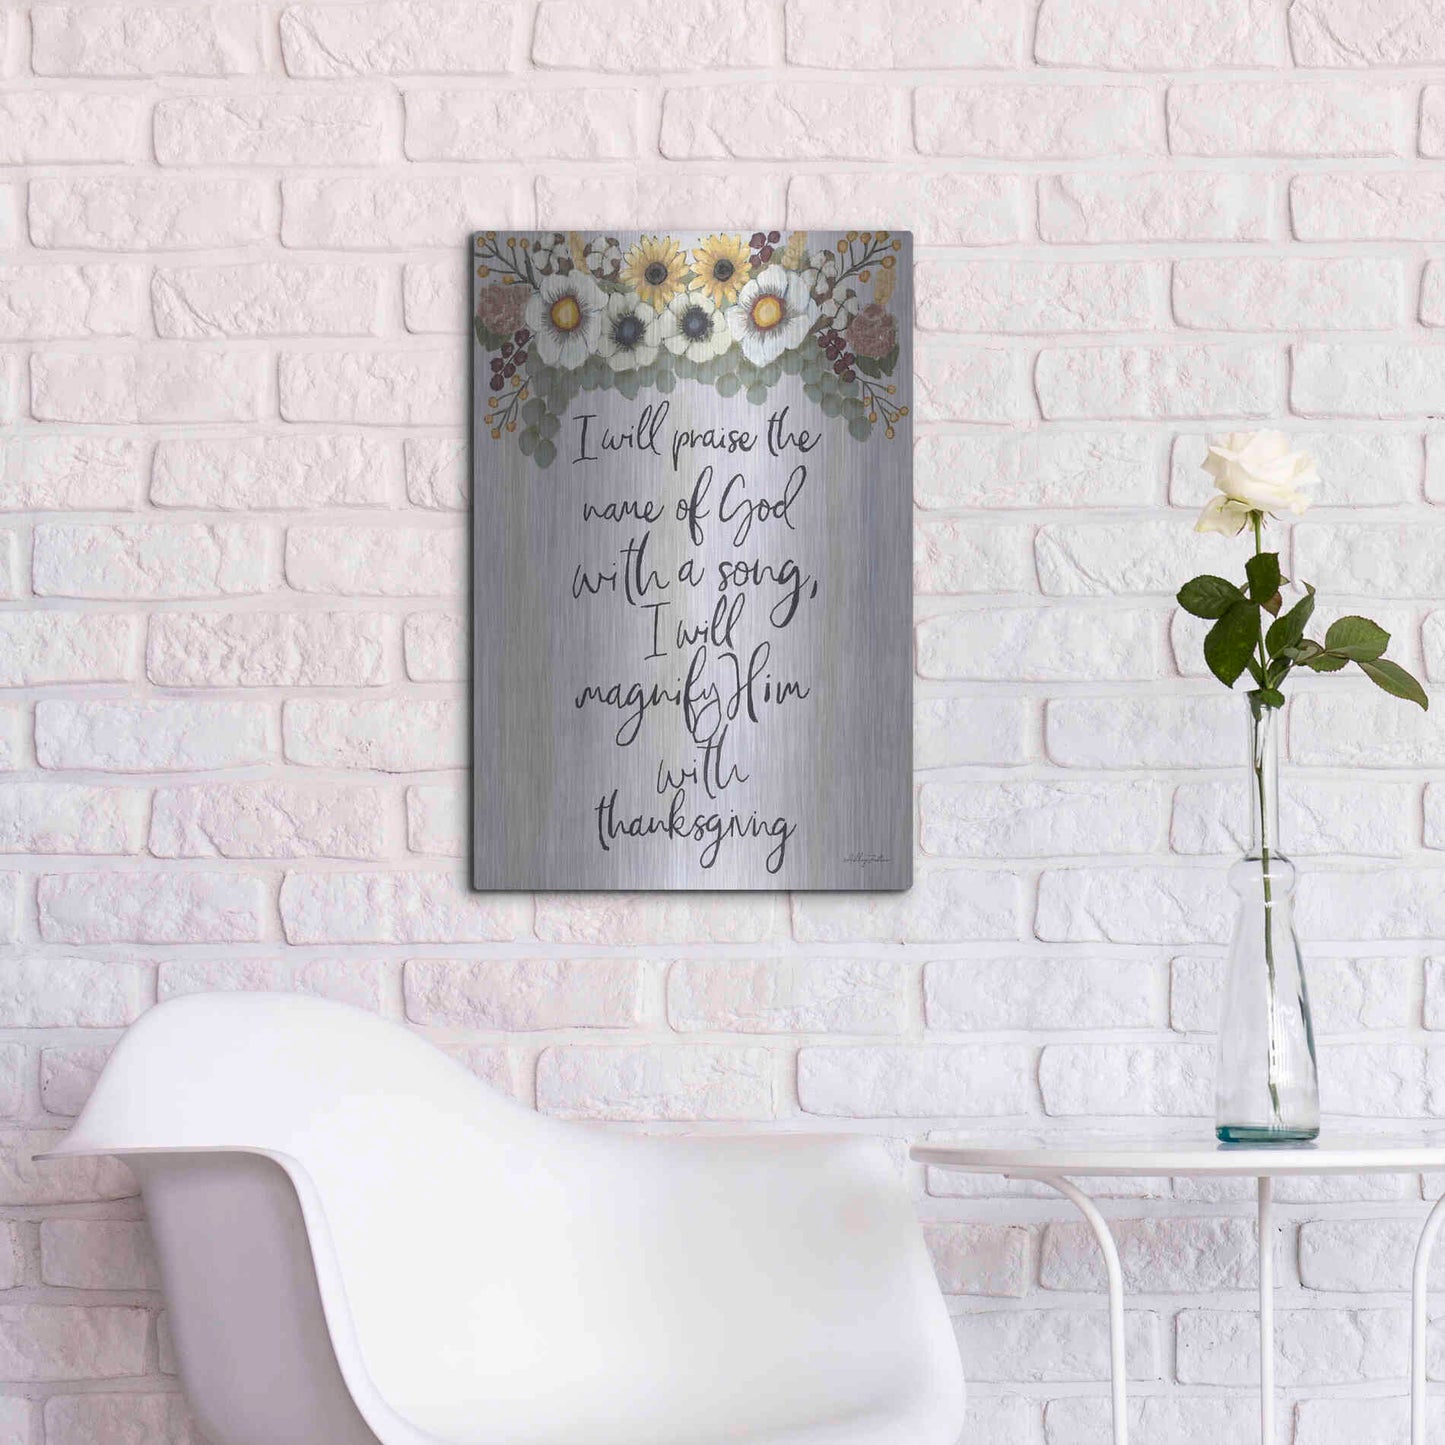 Luxe Metal Art 'I Will Praise the Name of God' by Ashley Justice, Metal Wall Art,16x24